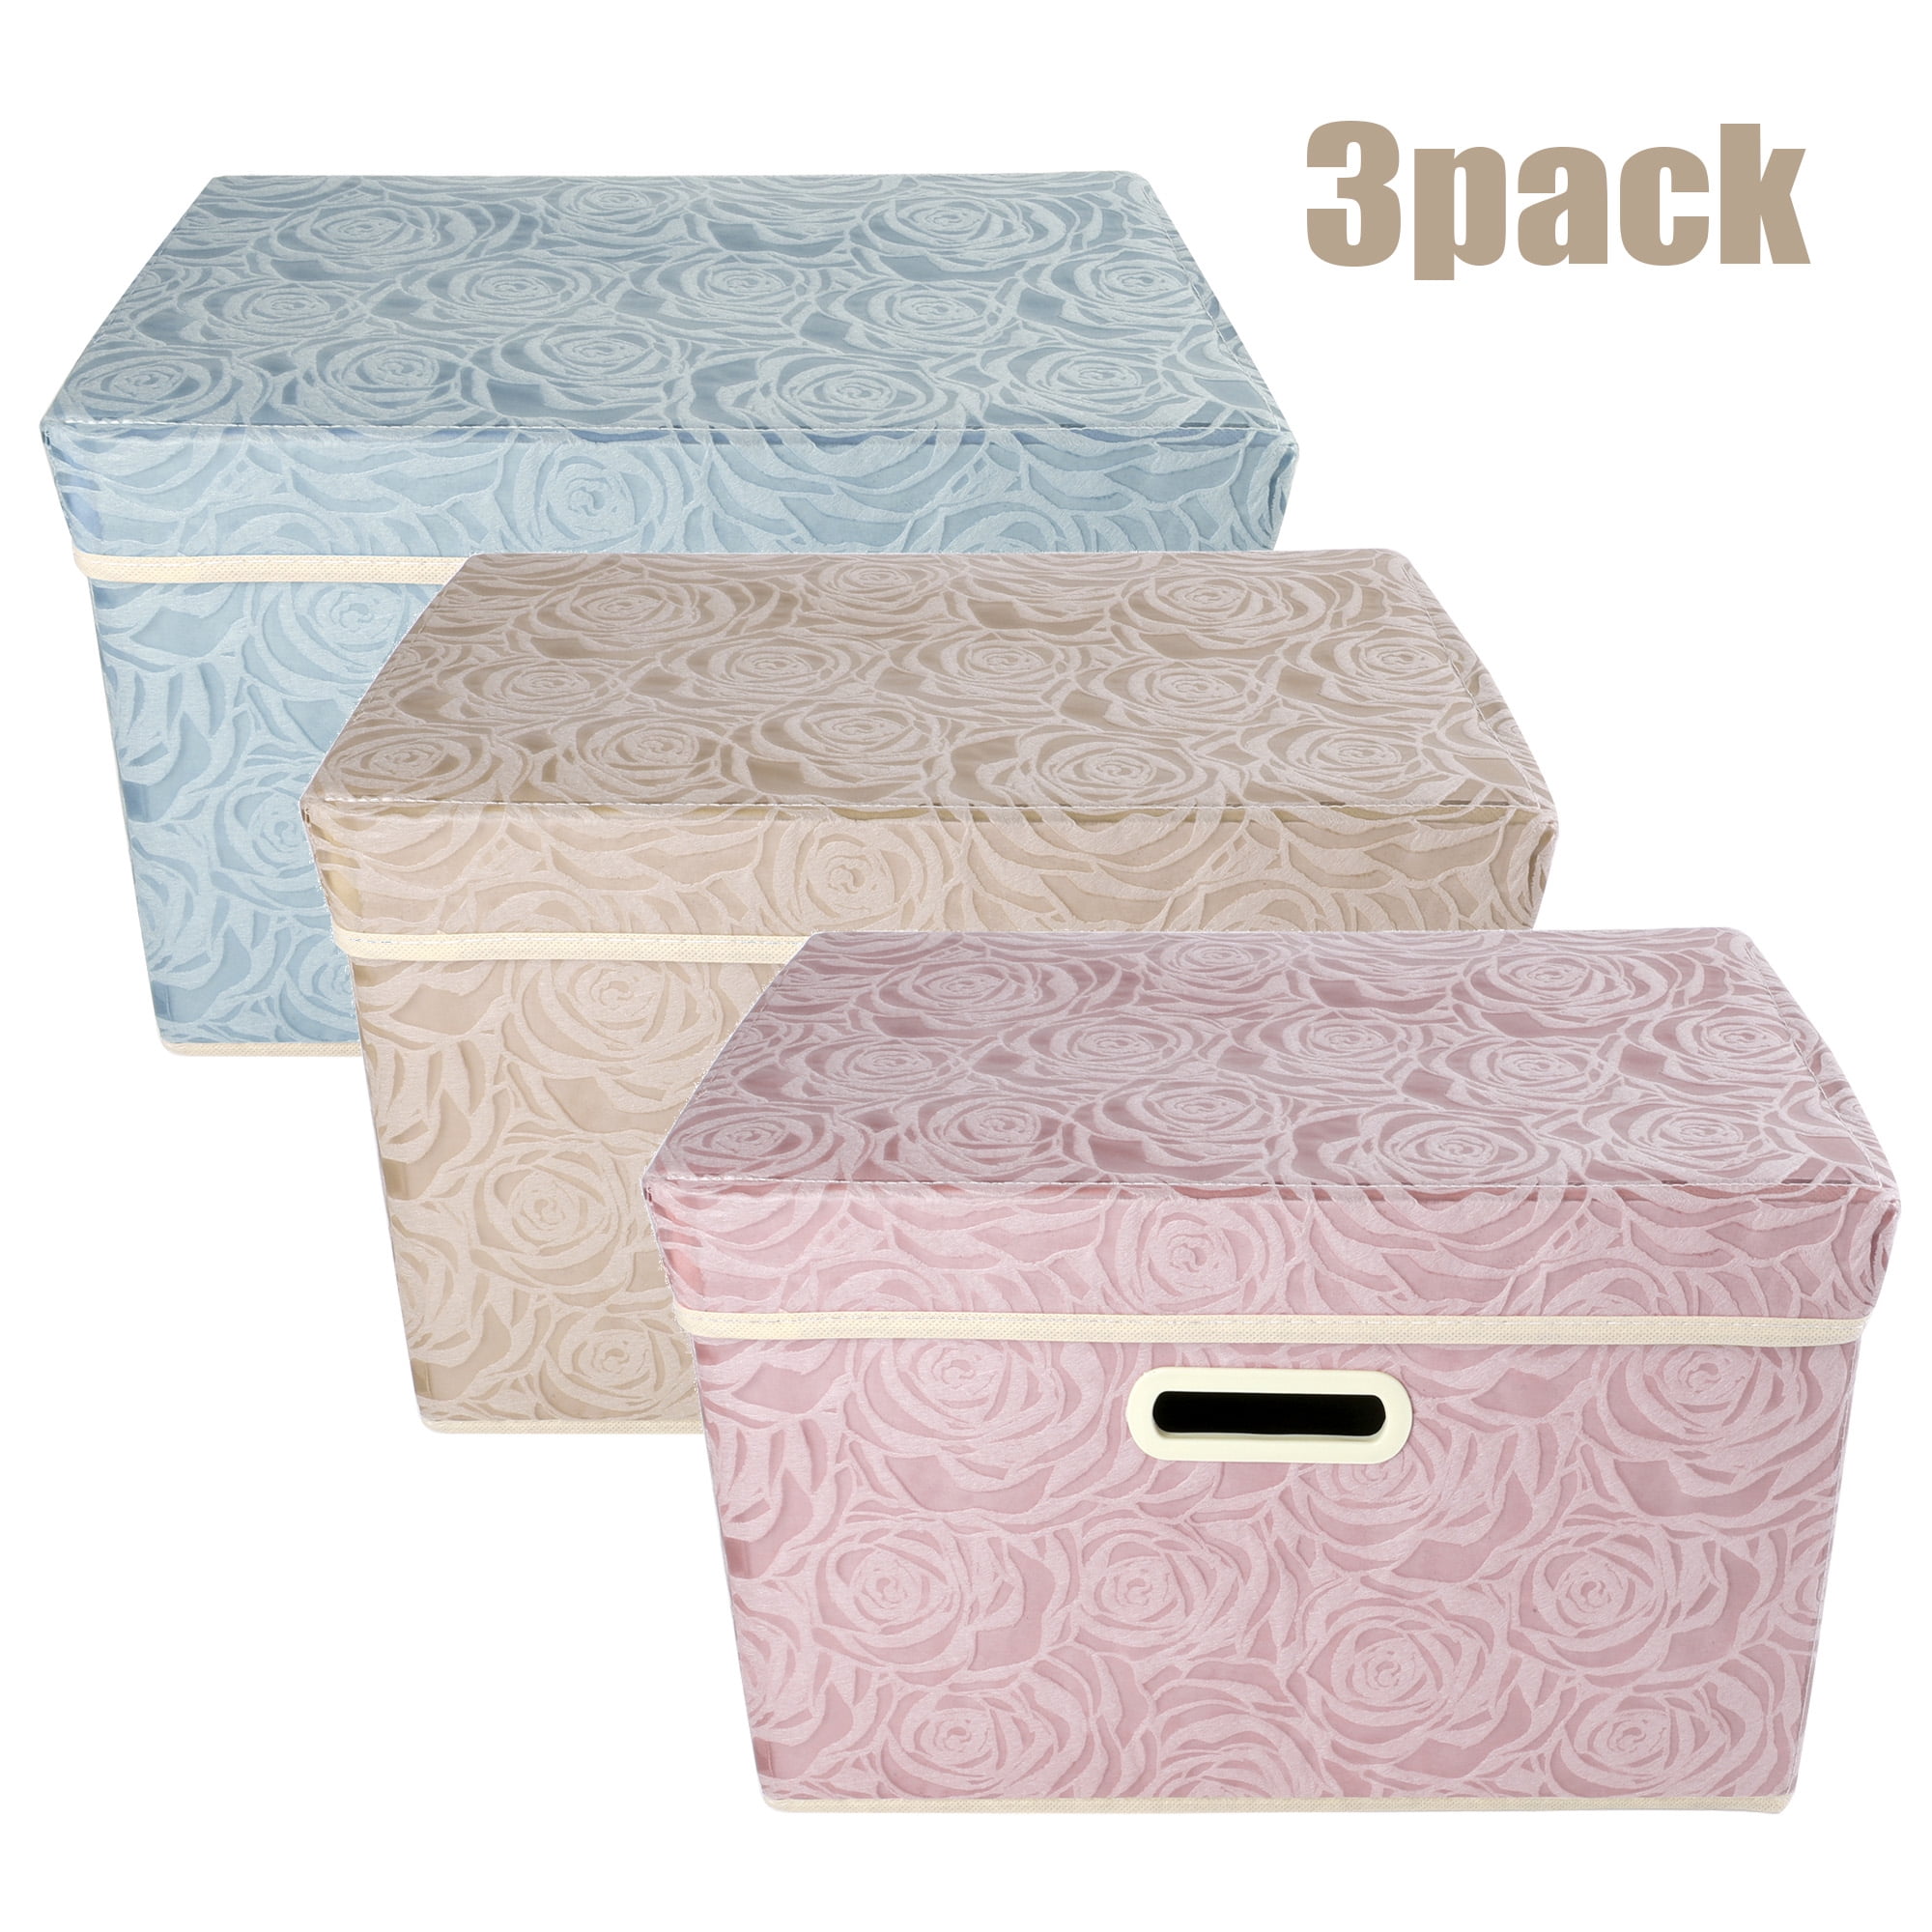 Collapsible Storage Bin Box with Lid Heavy Duty Fabric Cube Organizer Container& 